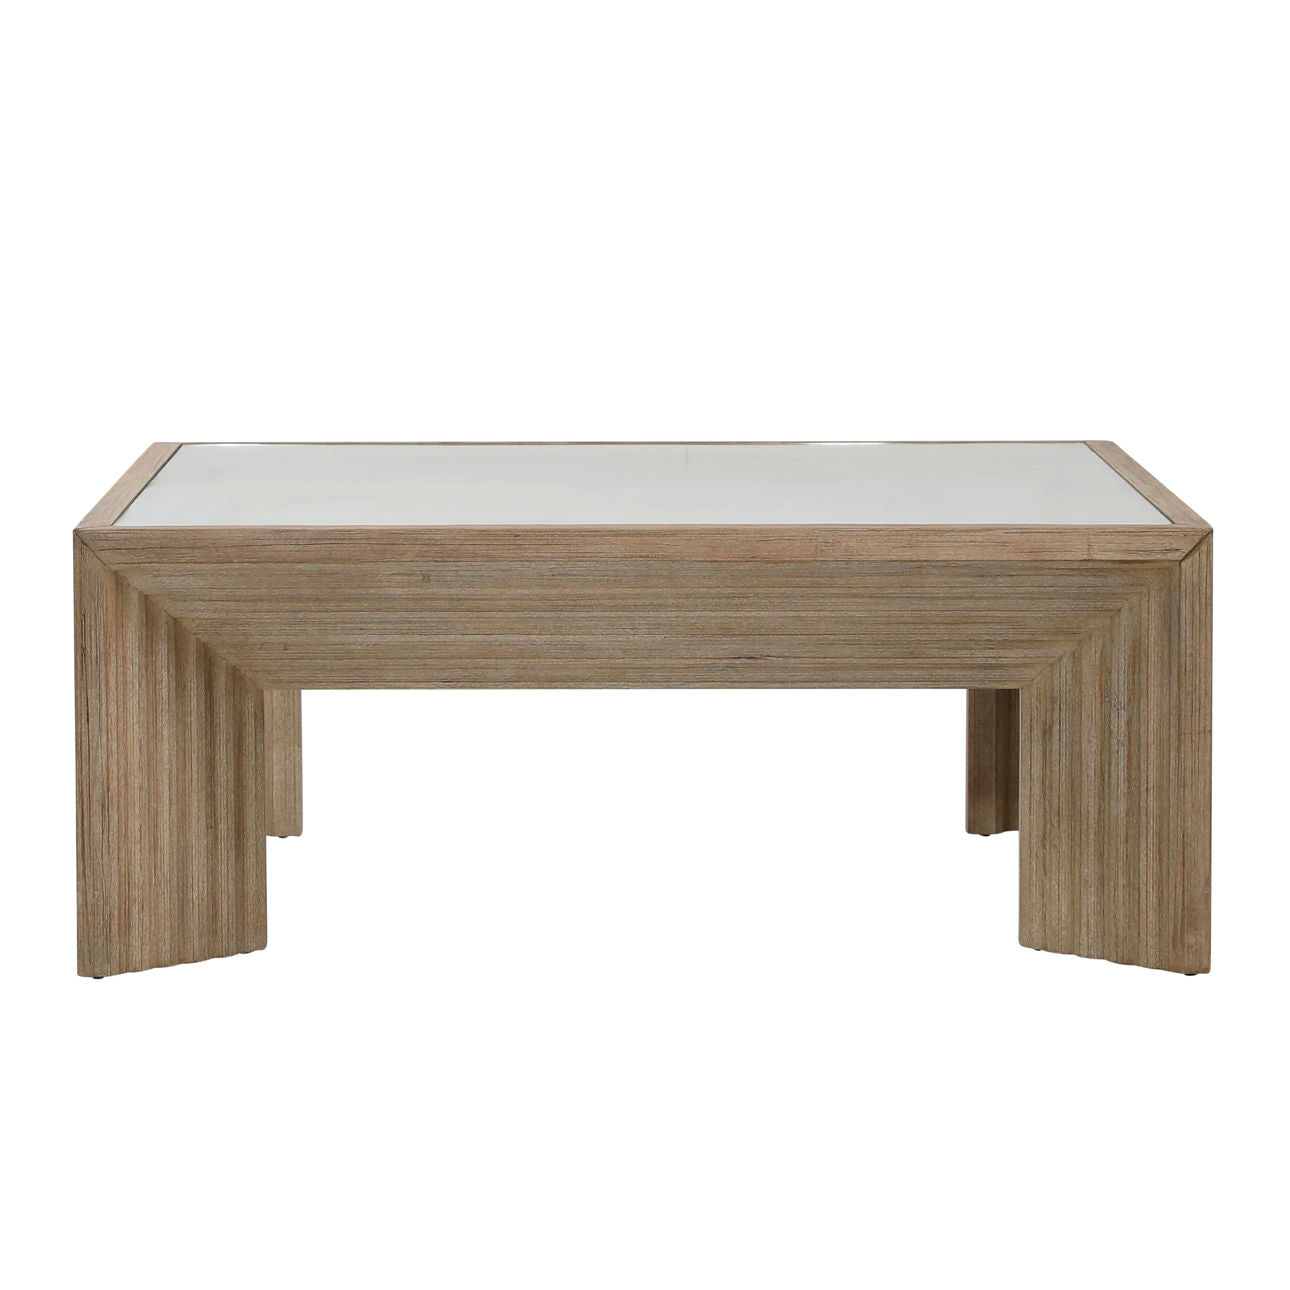 GLENVIEW COFFEE TABLE